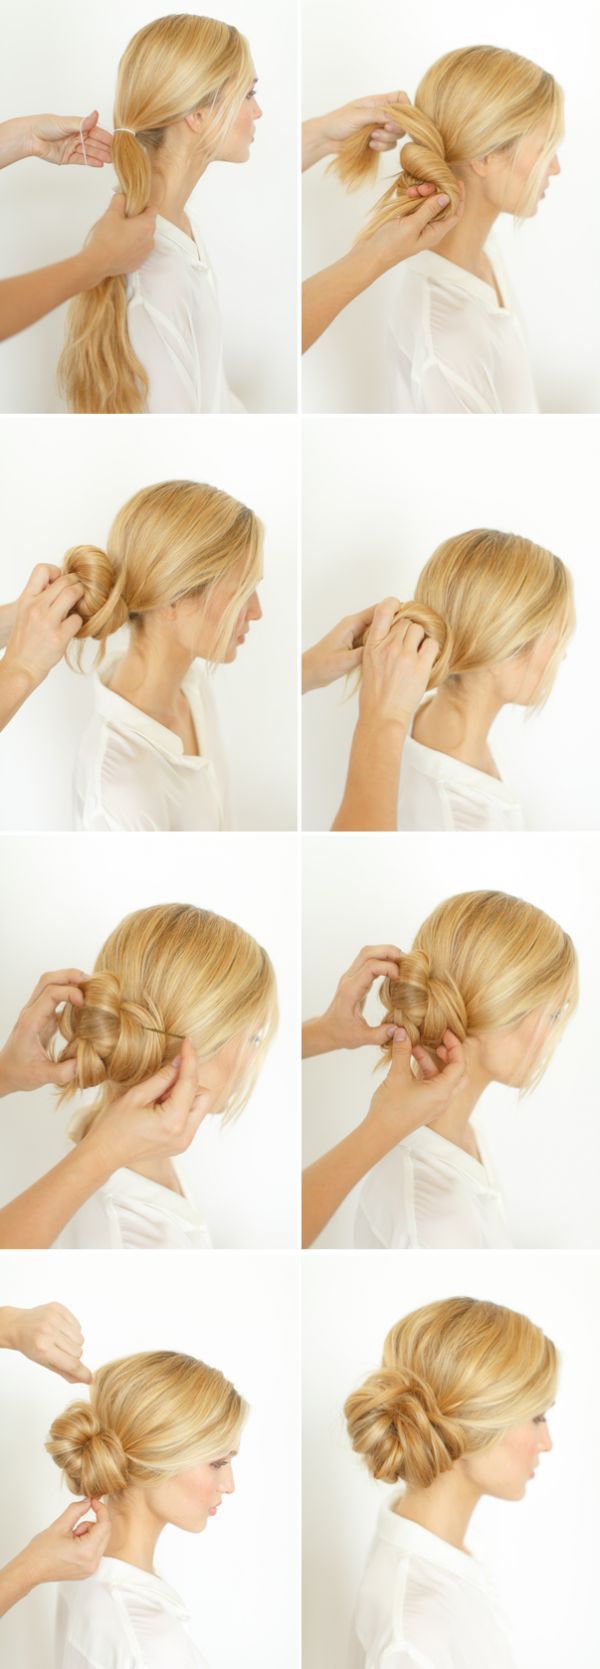 Graceful-and-Beautiful-Low-Side-Bun-Hairstyle-Tutorials-and-Hair.jpg